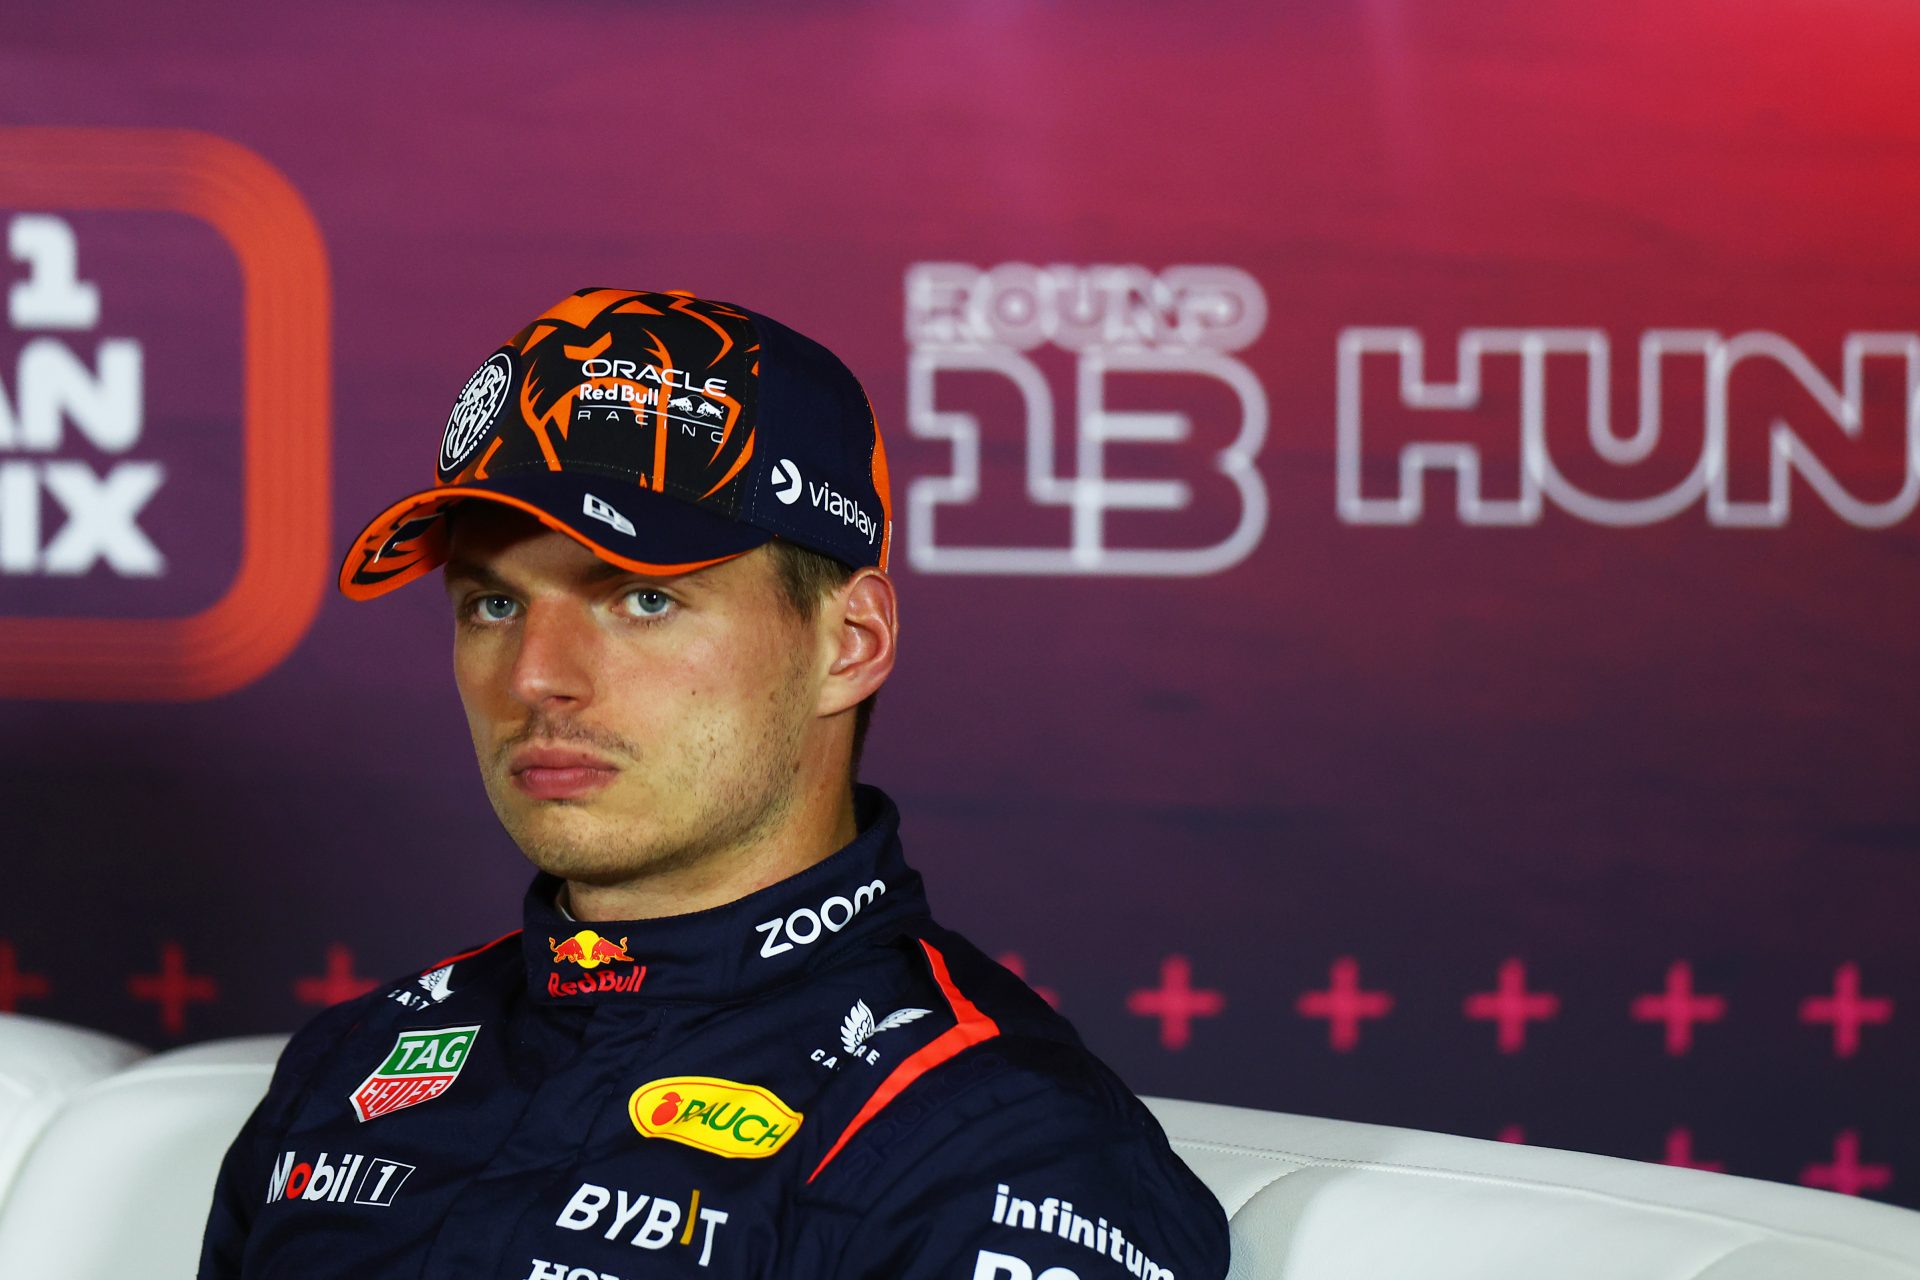 'Stay home!': Max Verstappen slams Red Bull after third straight loss